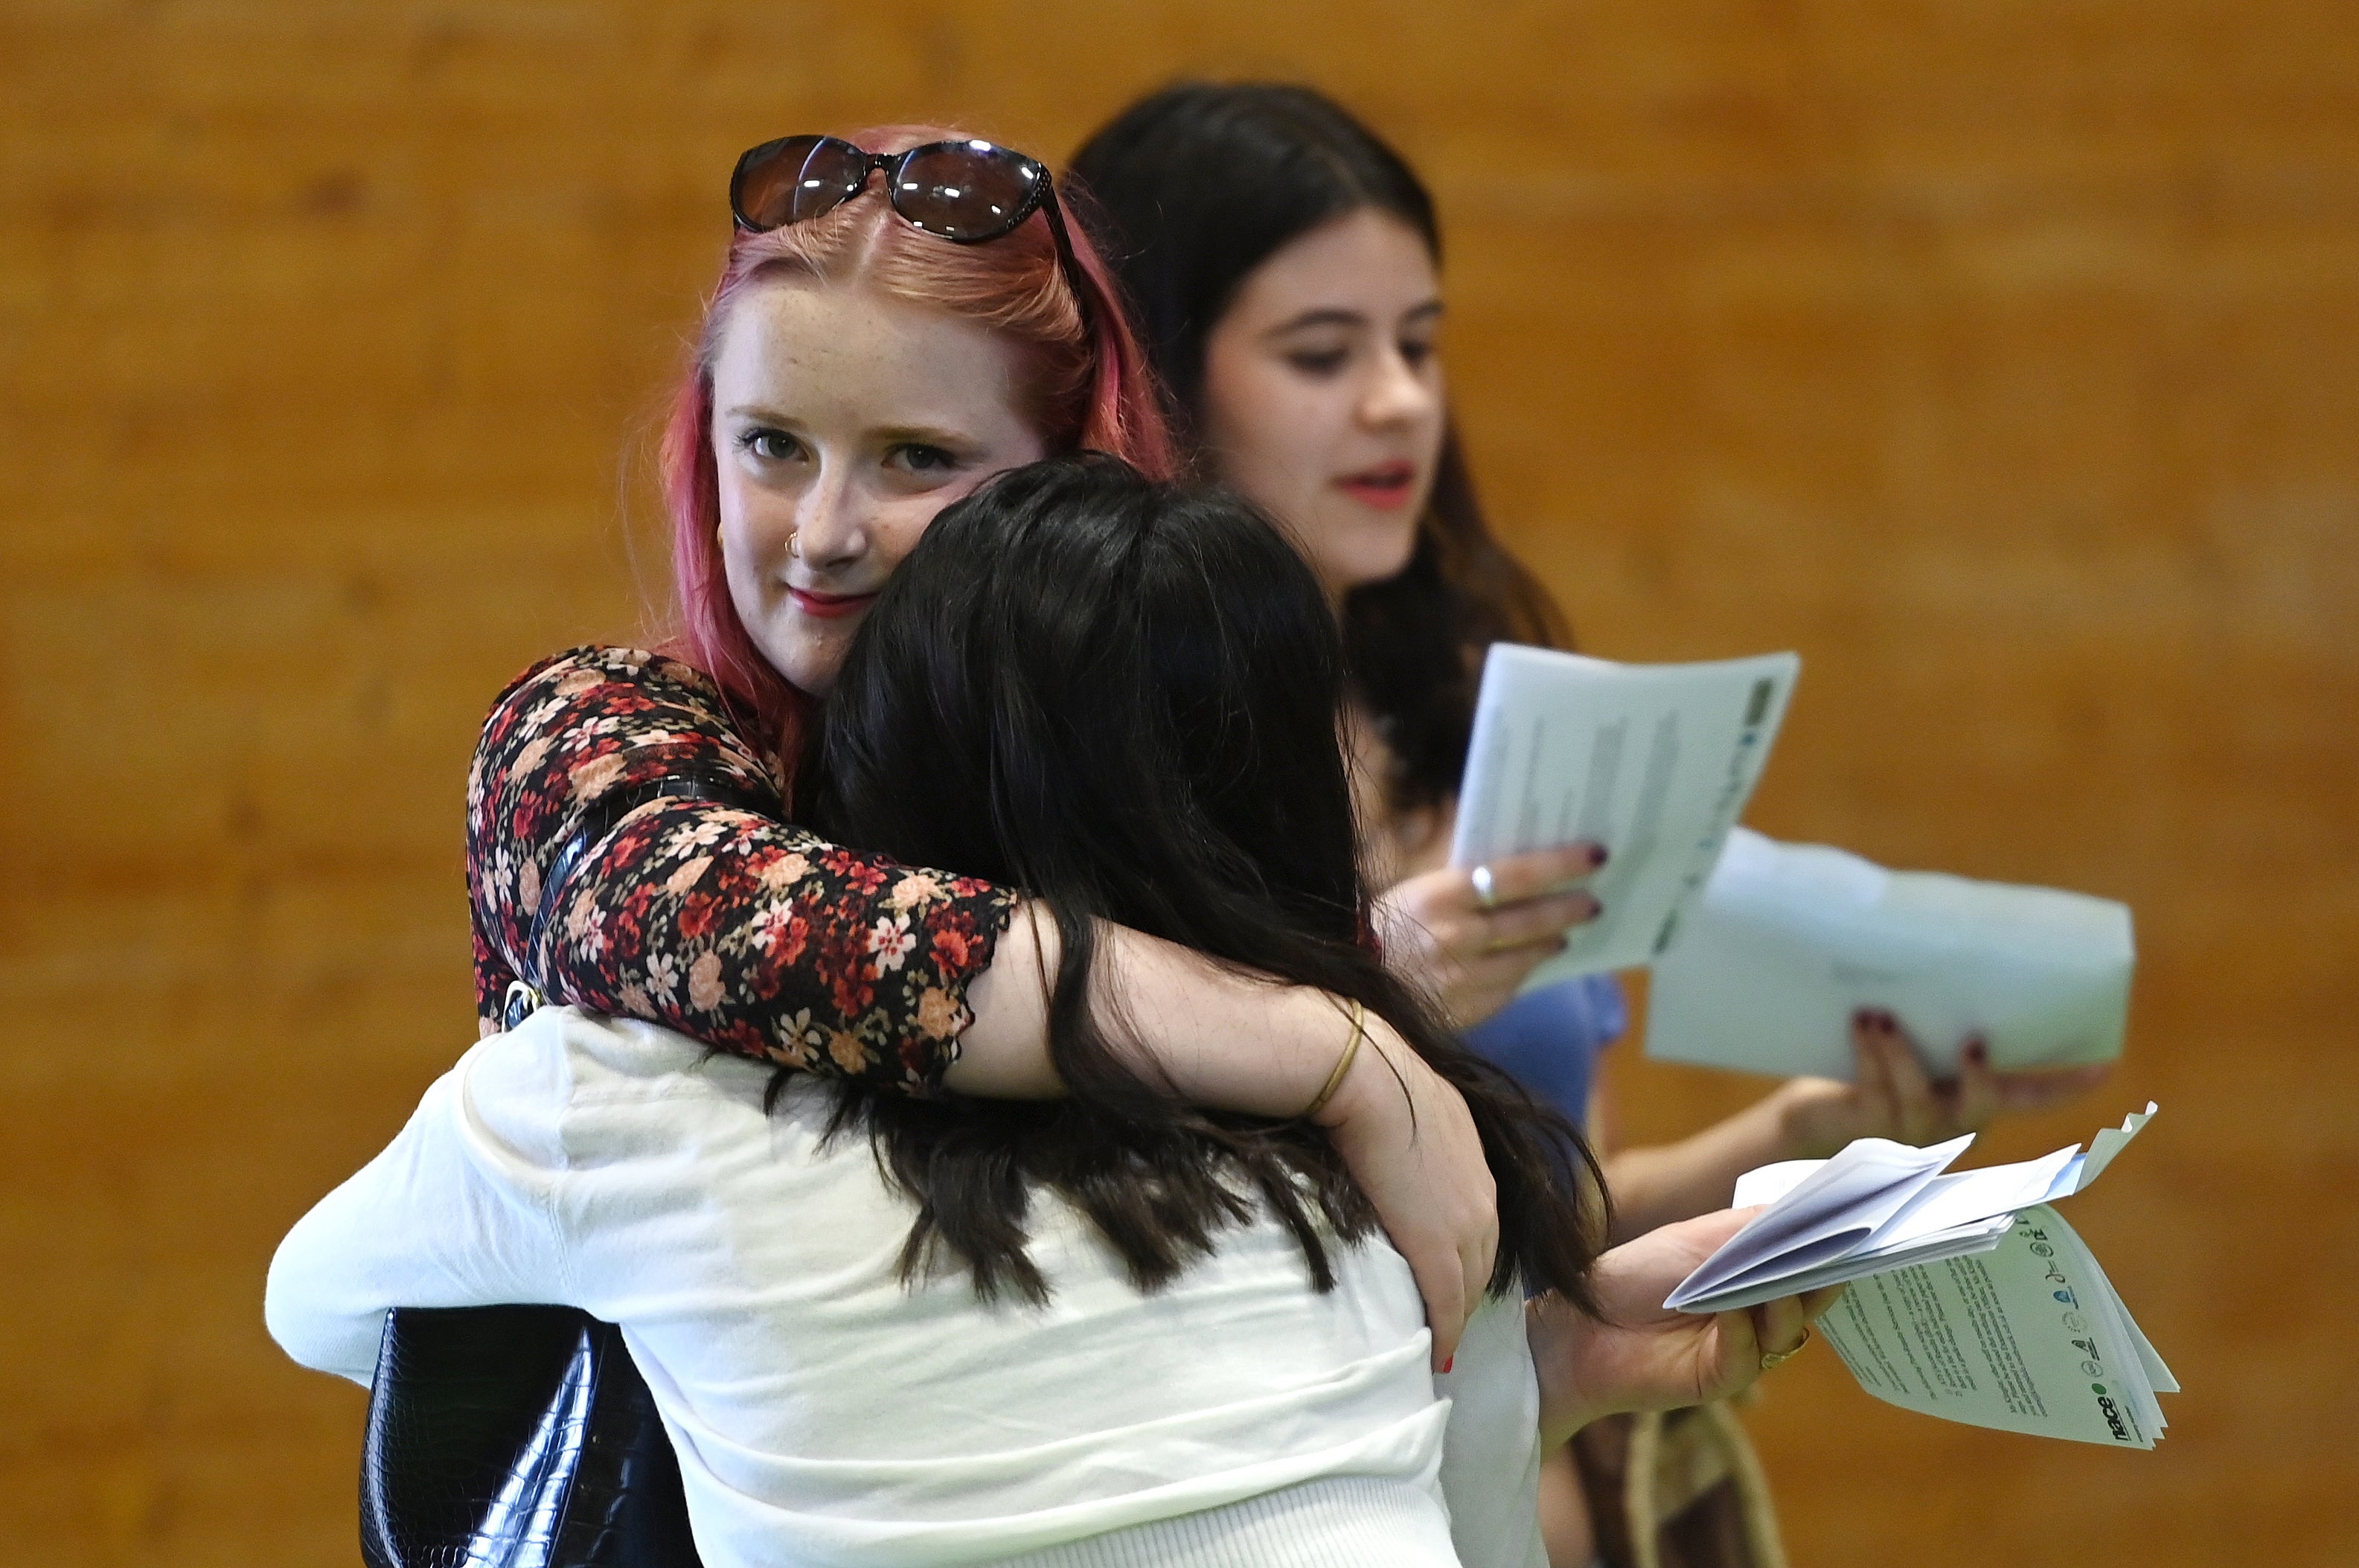 Students picked up their A-level results last week